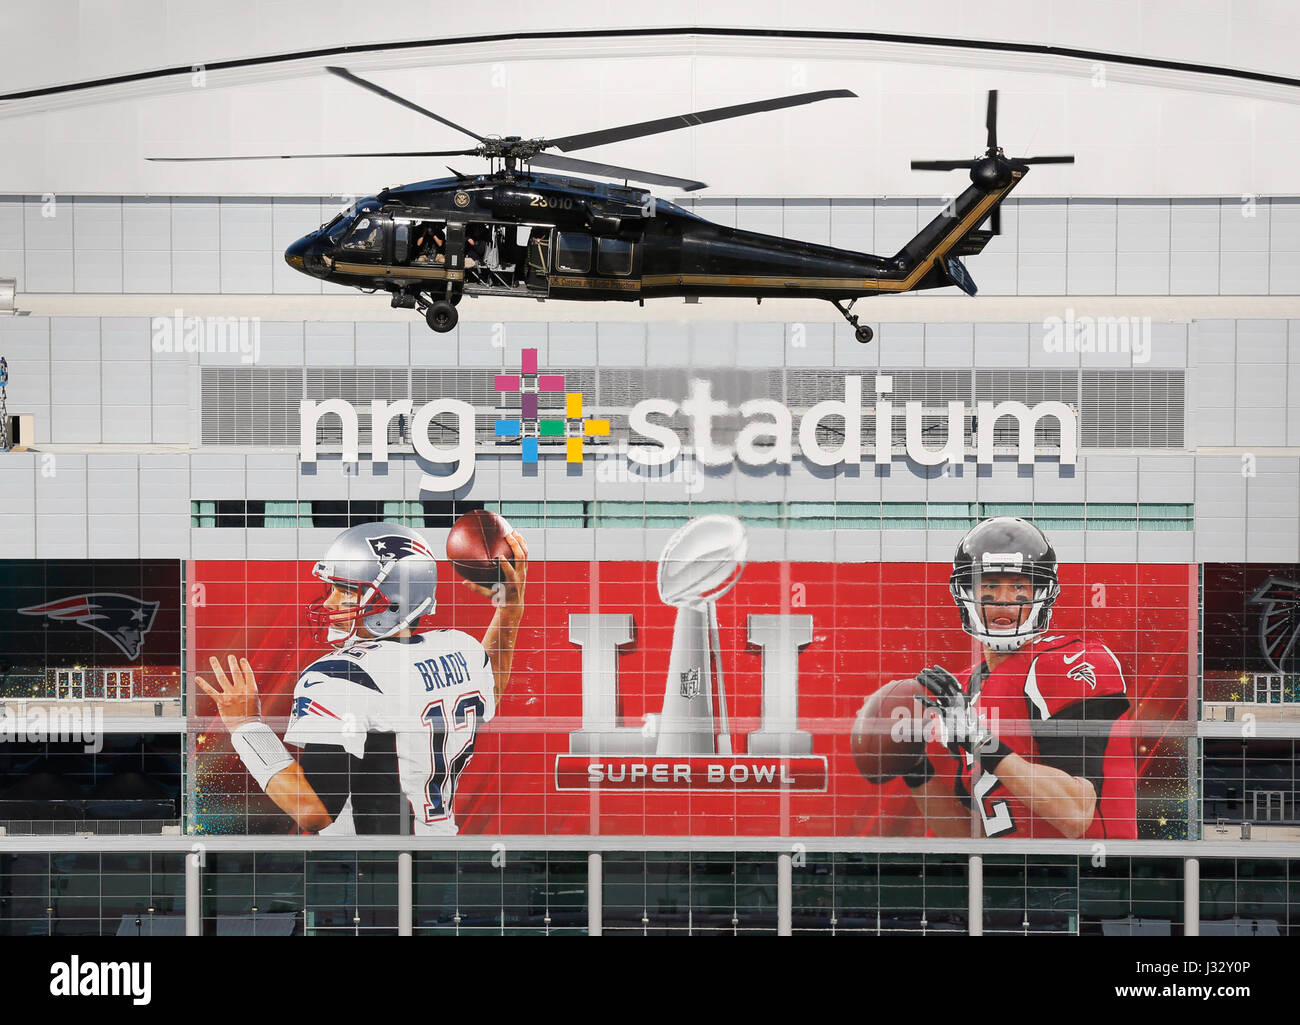 A U.S. Customs and Border Protection, Air and Marine Operations, Black Hawk helicopter flies over NRG Stadium in advance of Super Bowl LI in Houston, Texas, Jan 31, 2017. U.S. Customs and Border Protection Photo by Glenn Fawcett Stock Photo